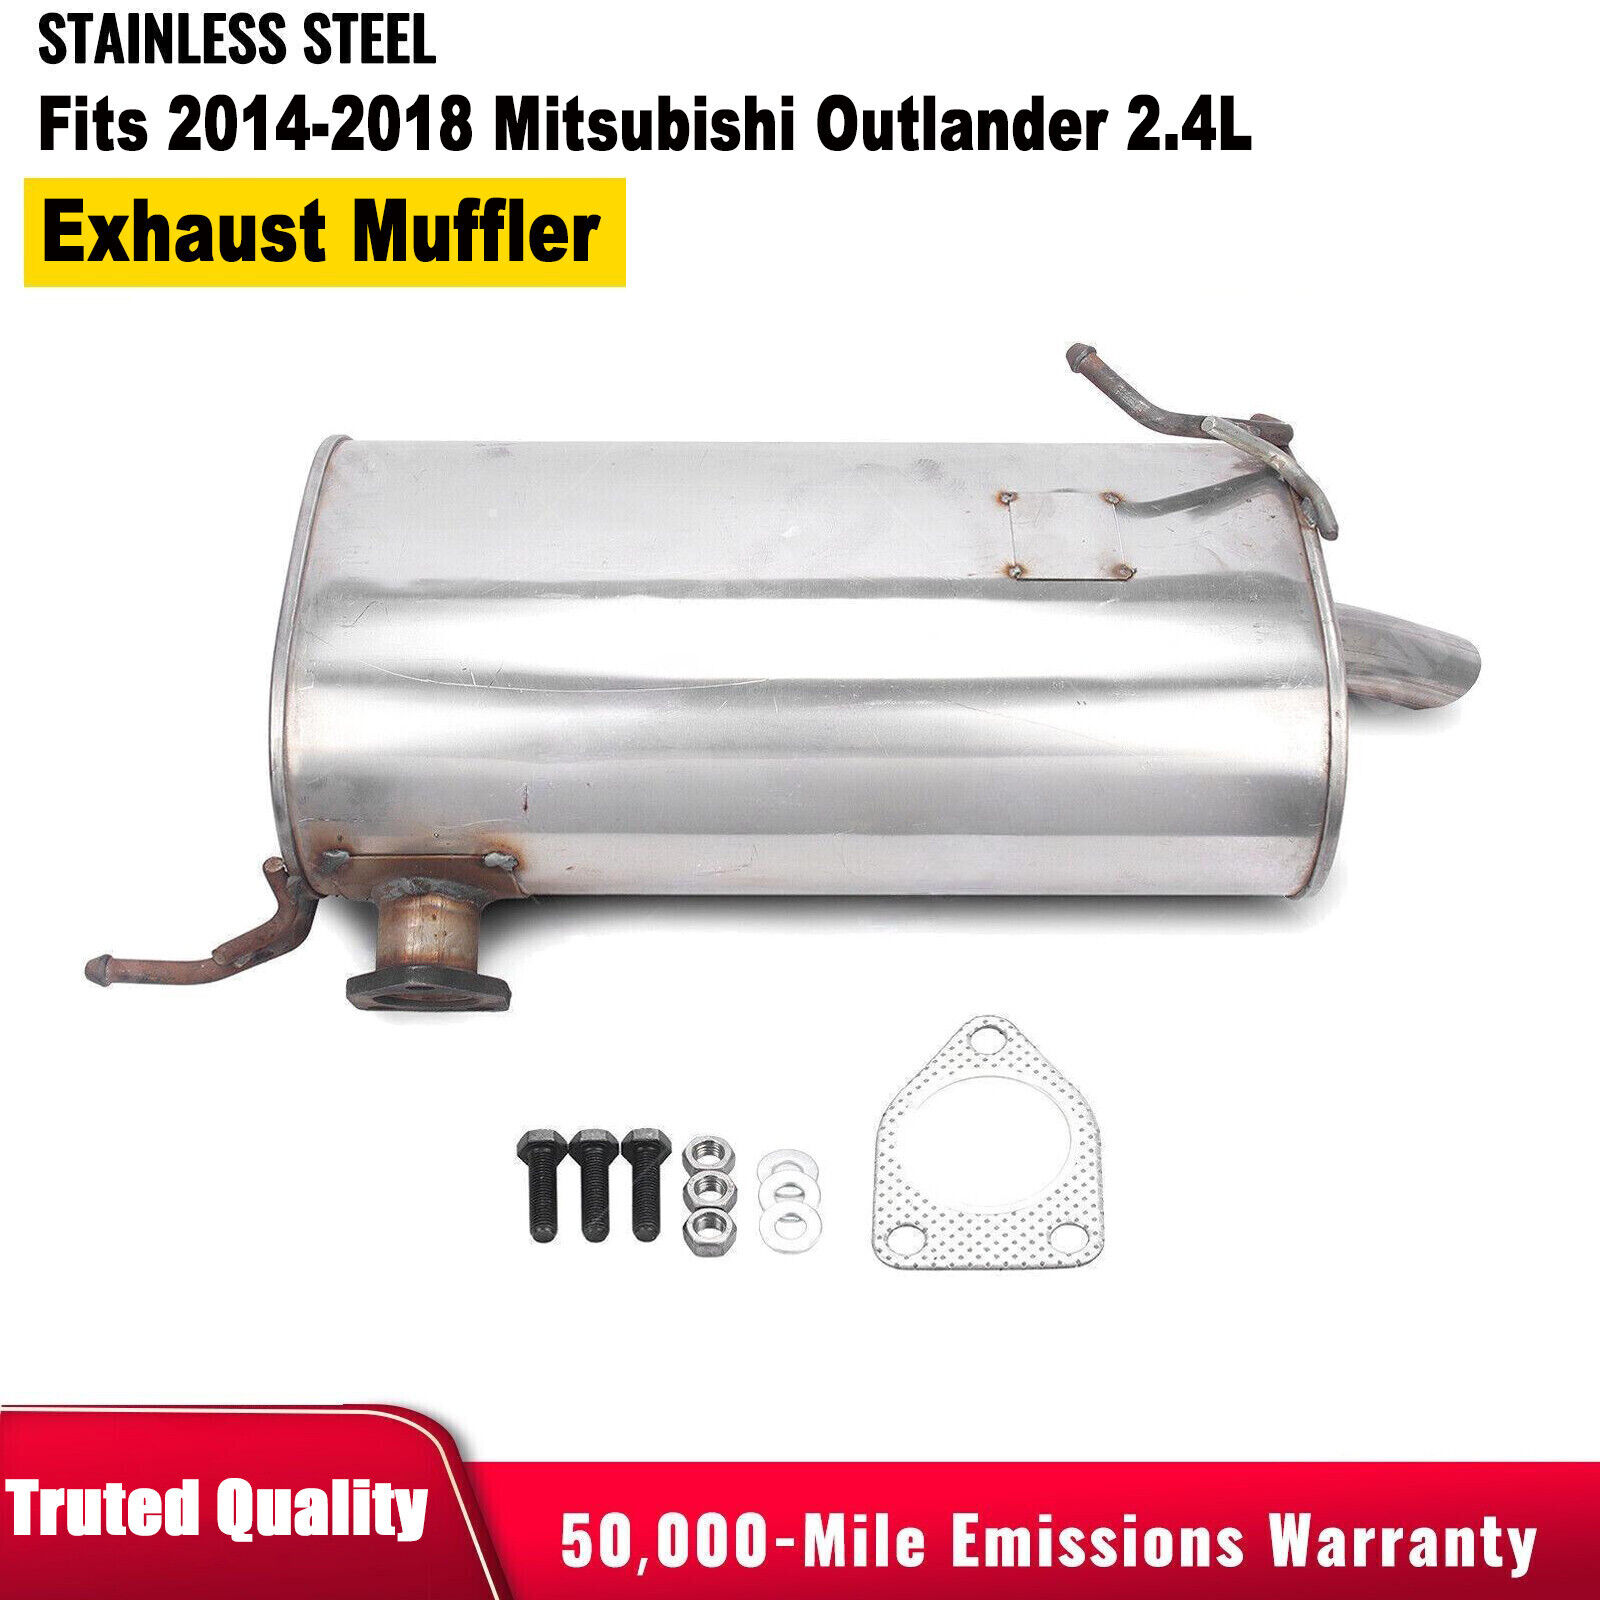 FITS 2014-2018 MITSUBISHI OUTLANDER 2.4L REAR MUFFLER ASSEMBLY STAINLESS STEEL